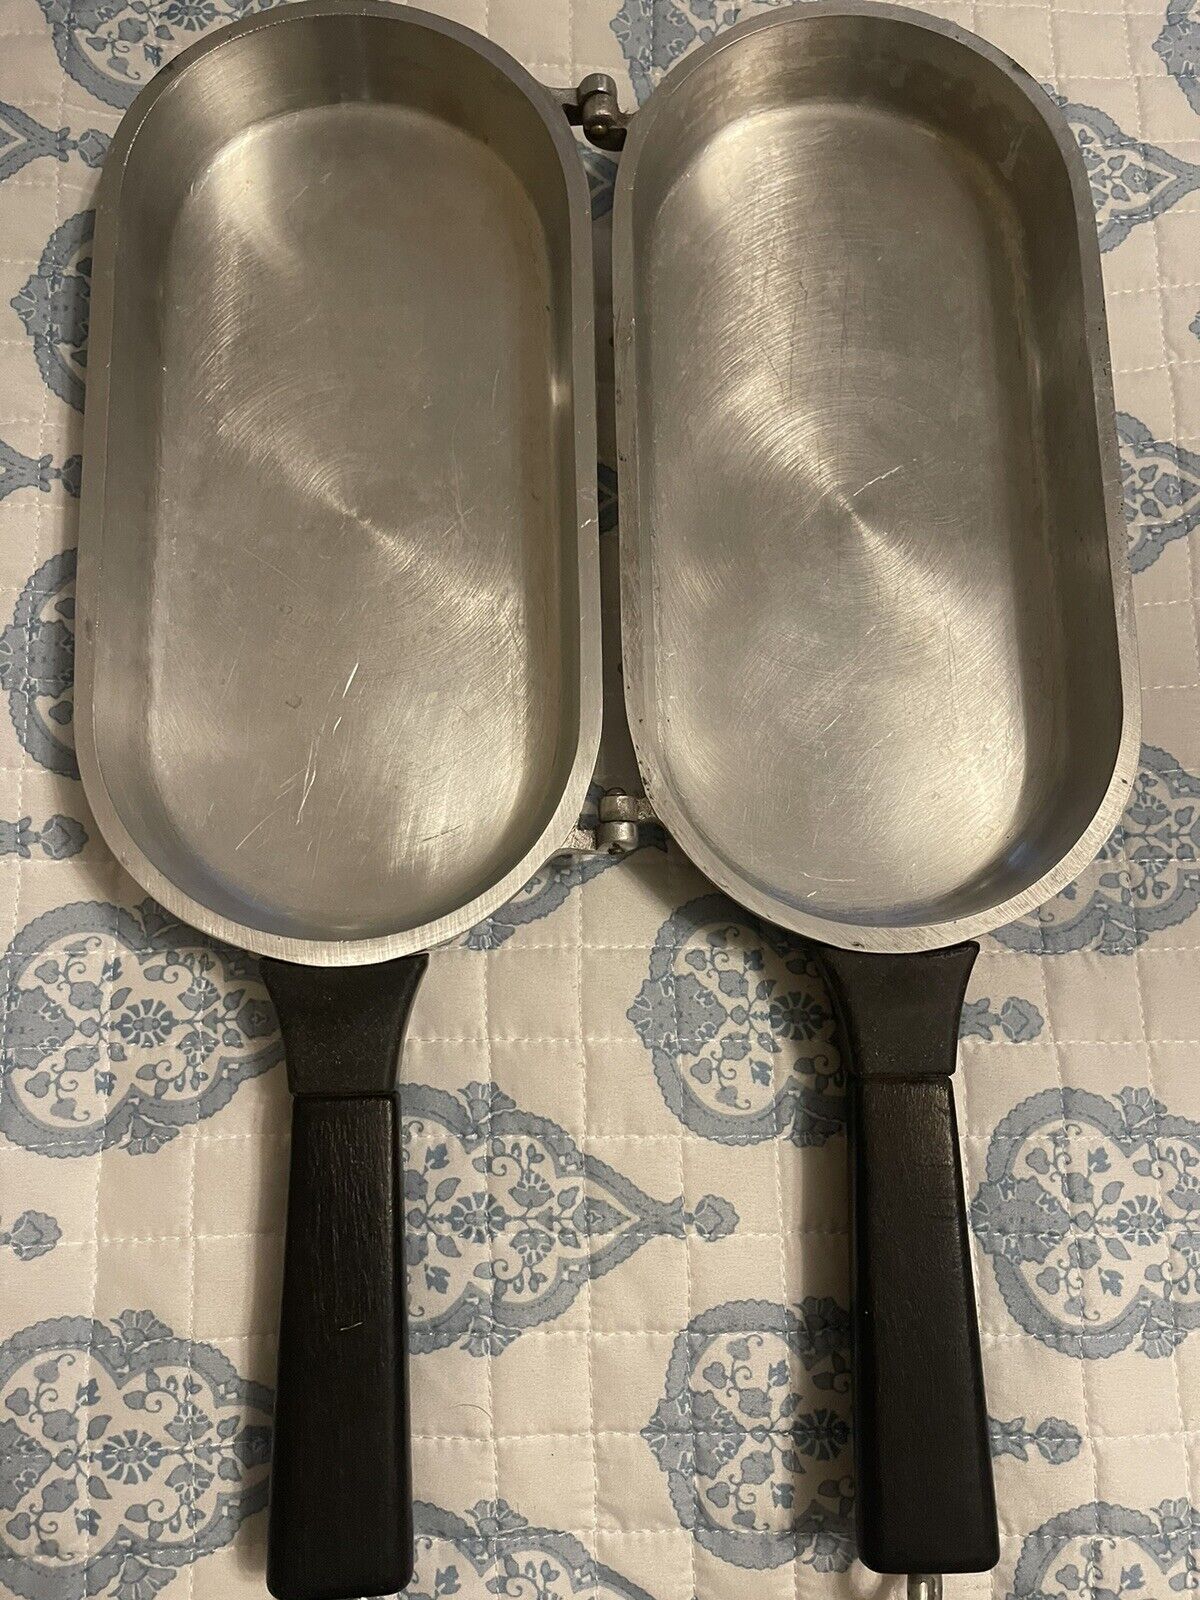 Vintage Miracle Maid Cookware Fish Fry Aluminum Folding Hinged Omelet Pan -NICE